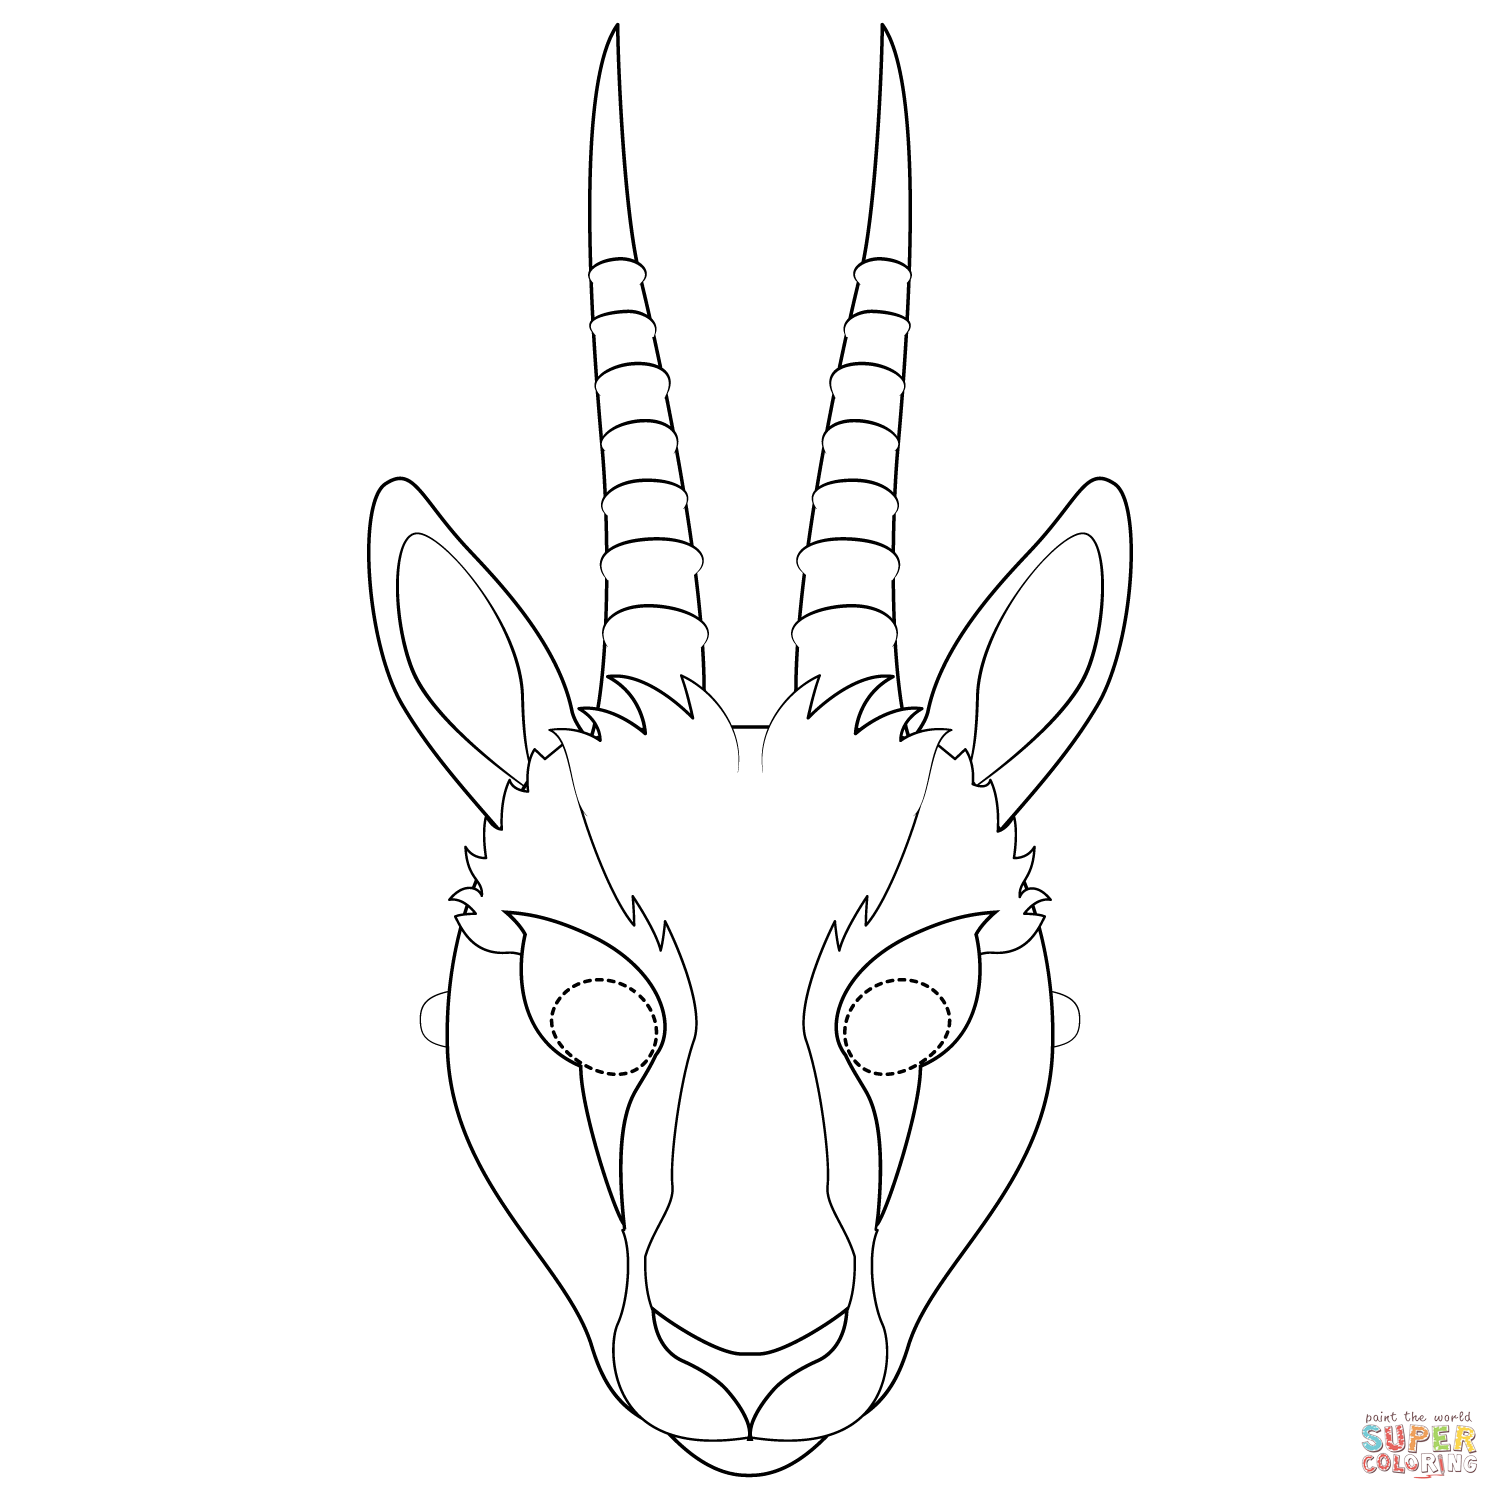 Gazelle Mask coloring page | Free Printable Coloring Pages